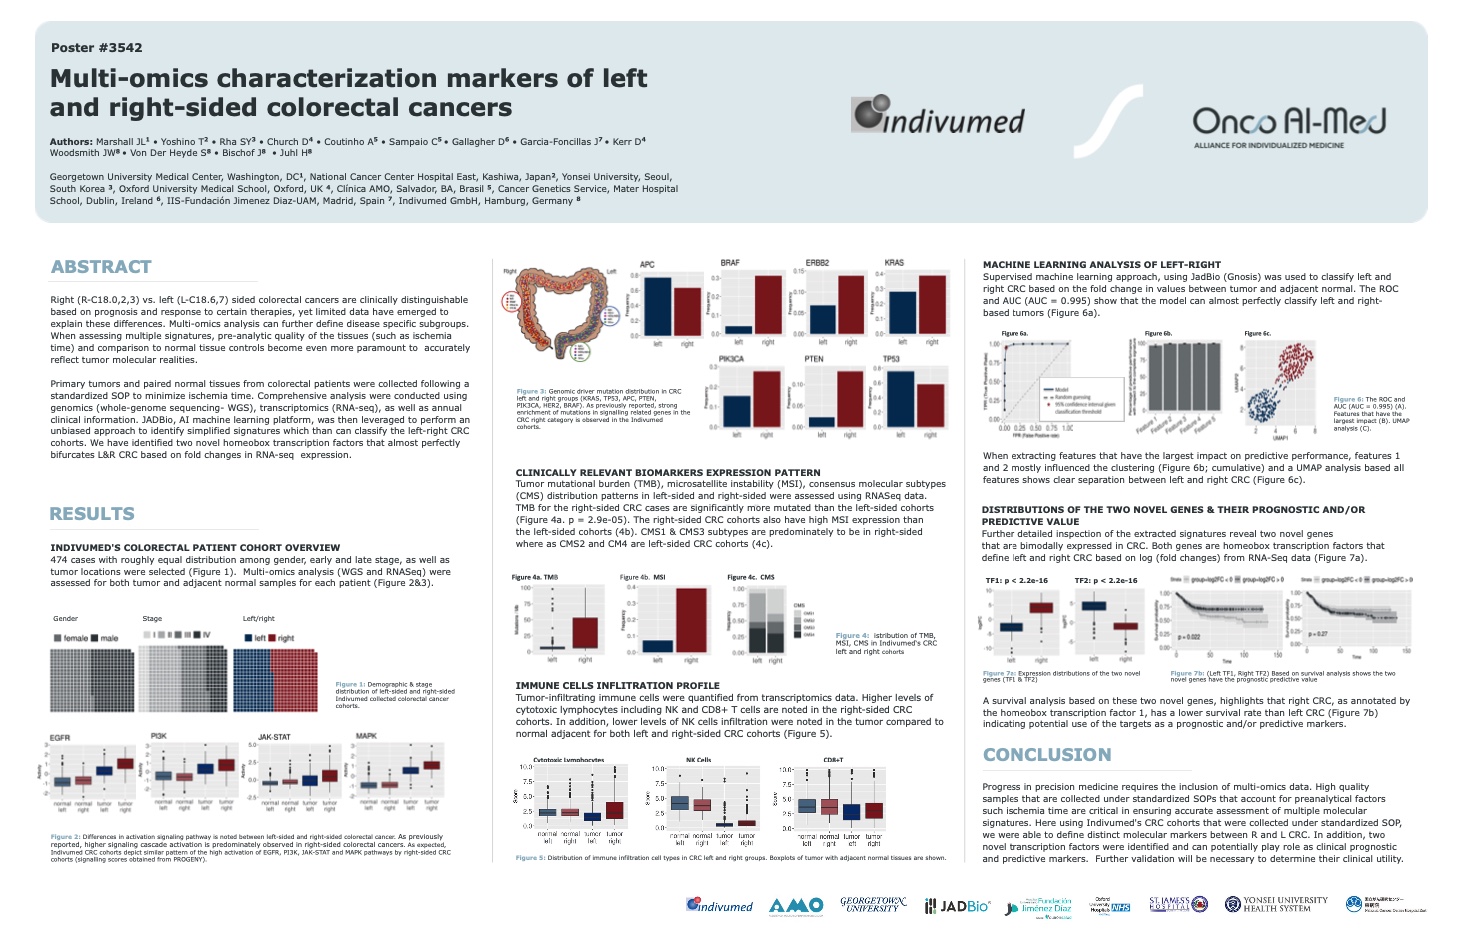 Multi-omics Characterization of Left-Right Colorectal Cancer poster